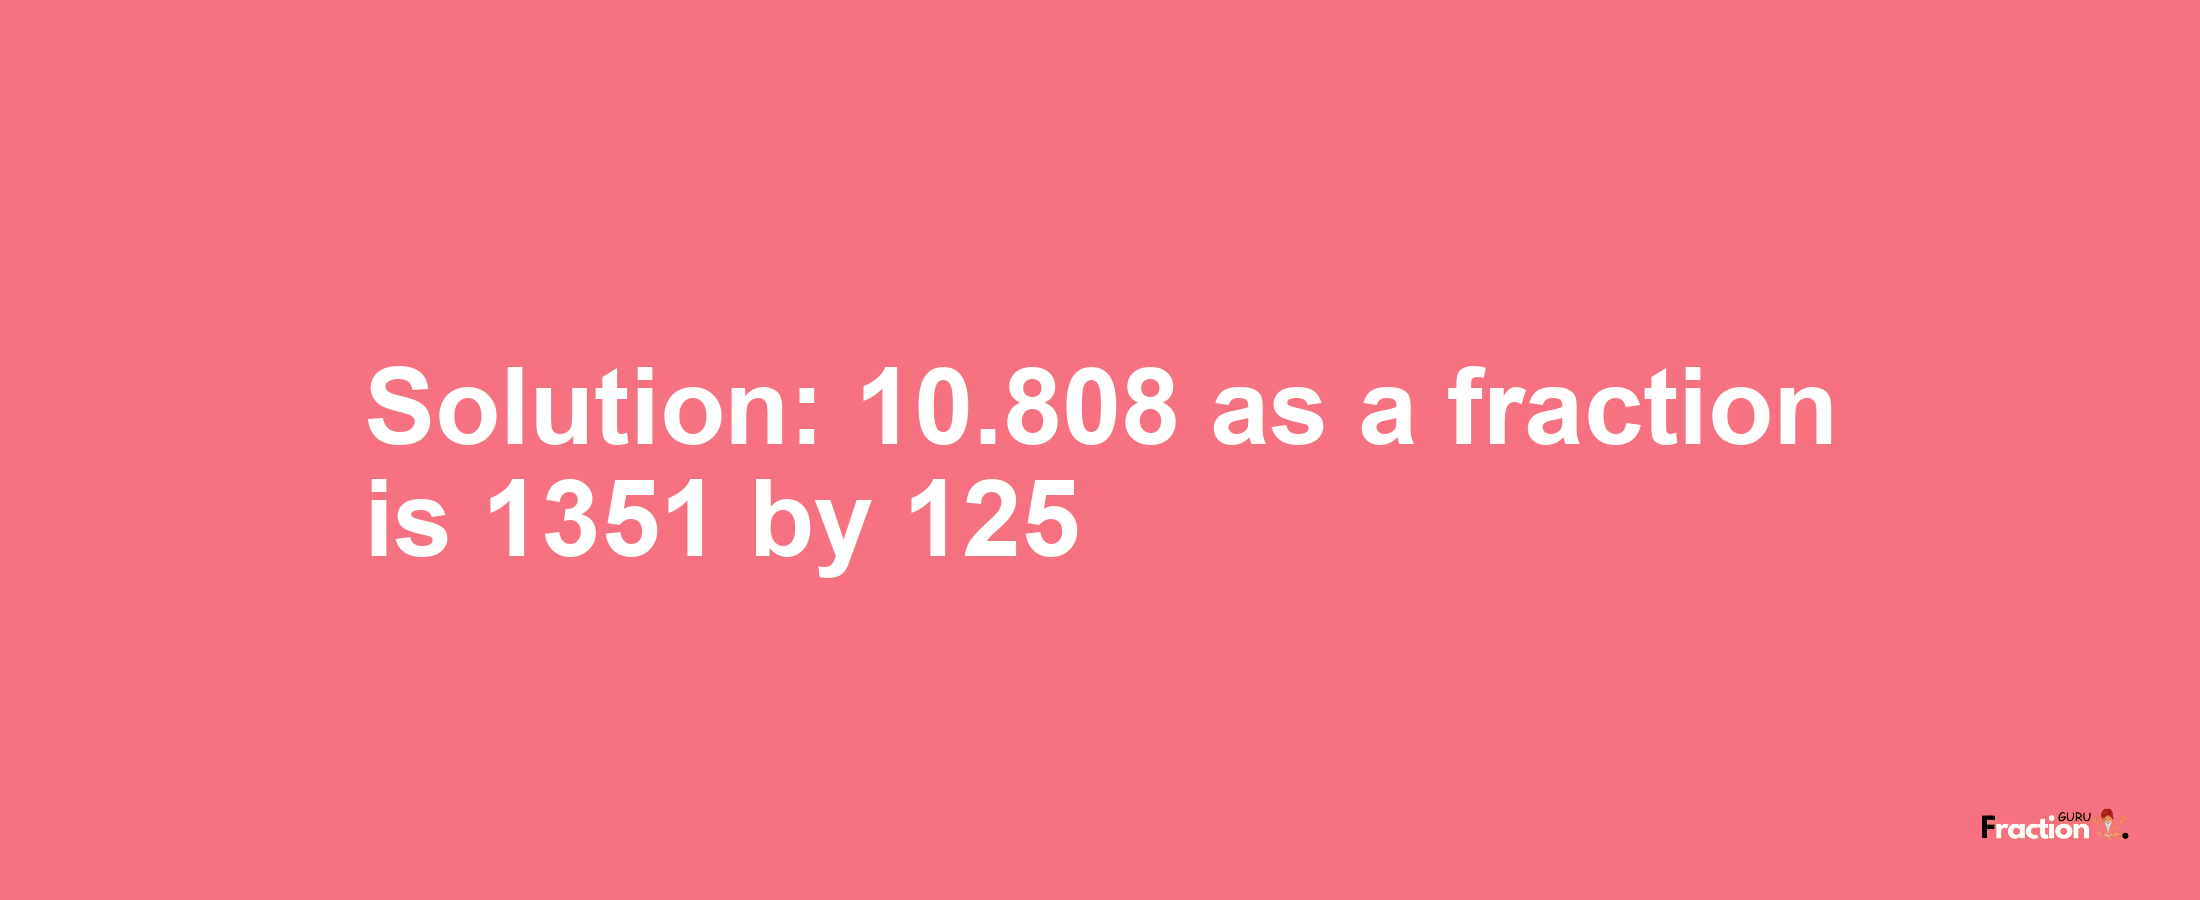 Solution:10.808 as a fraction is 1351/125